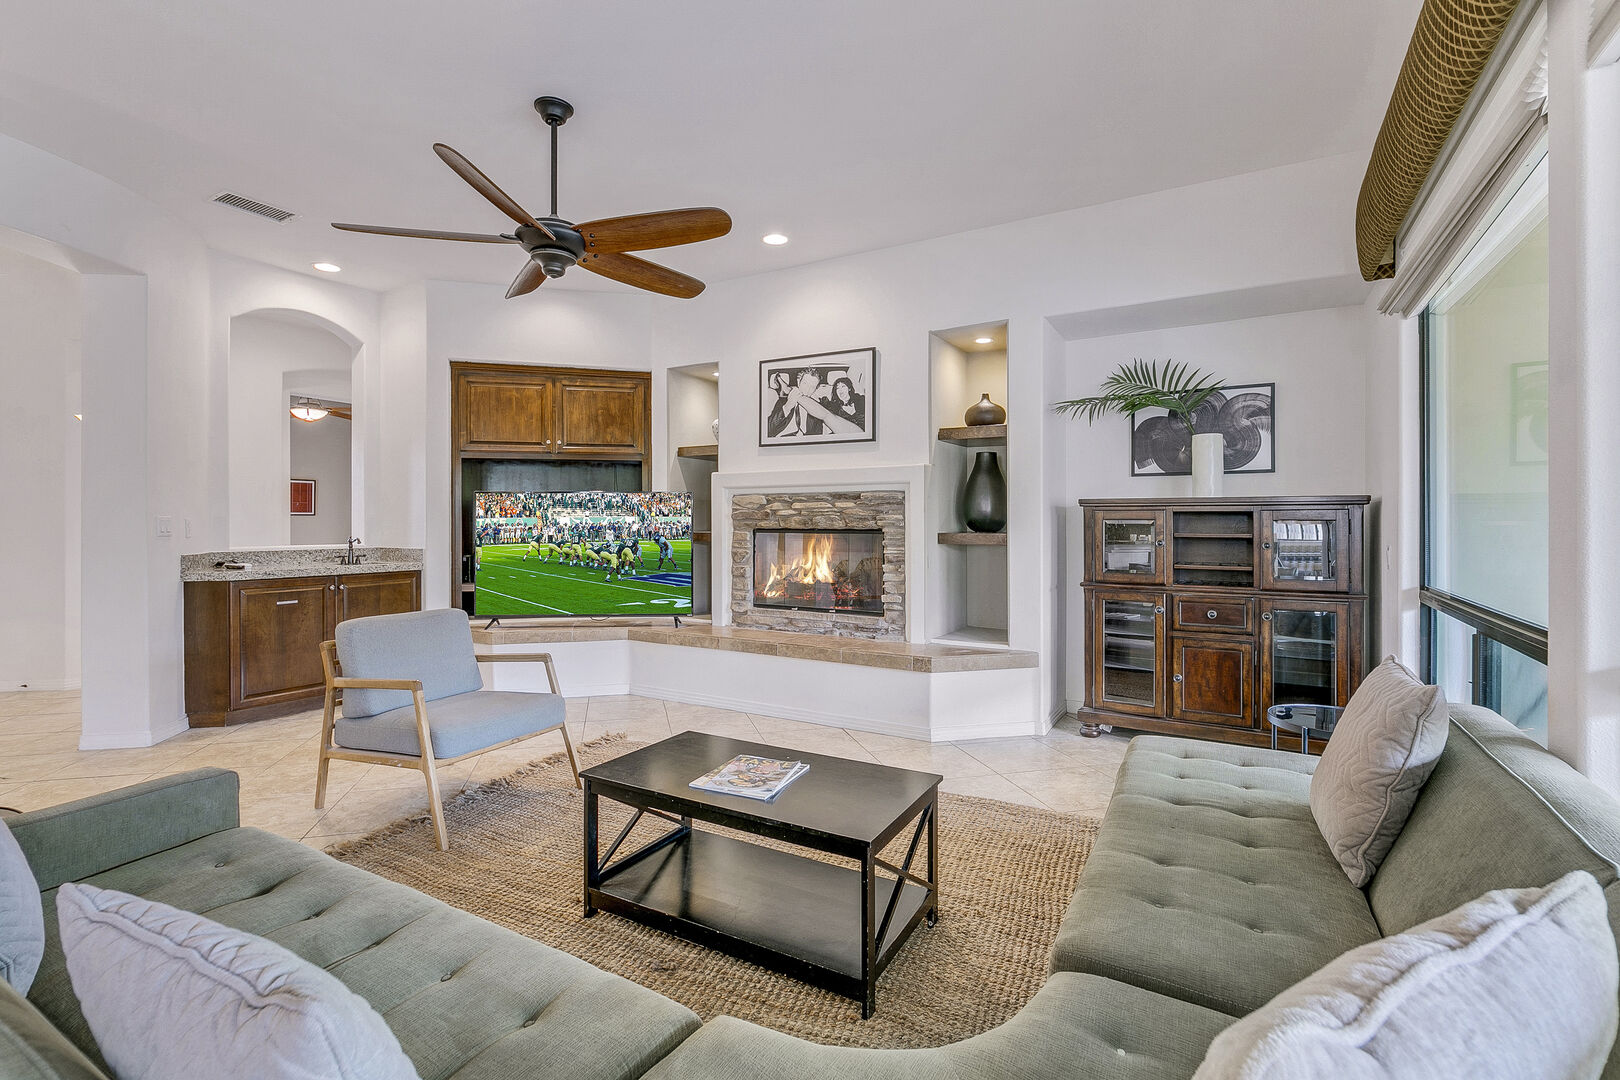 The family room has it all! Remote-controlled ceiling fan, fireplace for chilly nights and sink area.